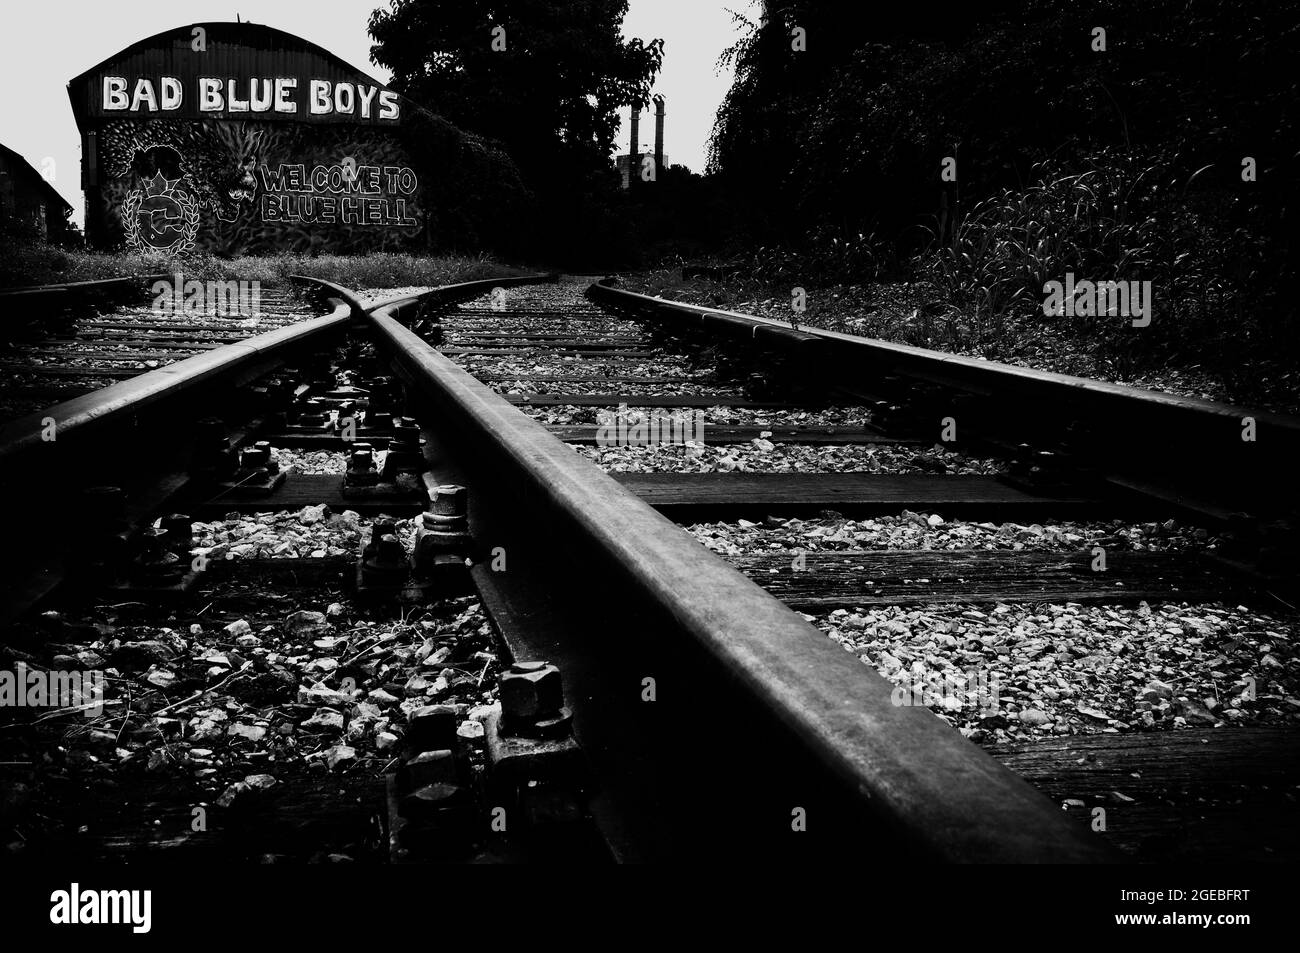 Disused railway sidings with an old railway shed with graffiti depicting Bad Blue Boys, supporters of the Croatian football team, Zagreb, Croatia Stock Photo